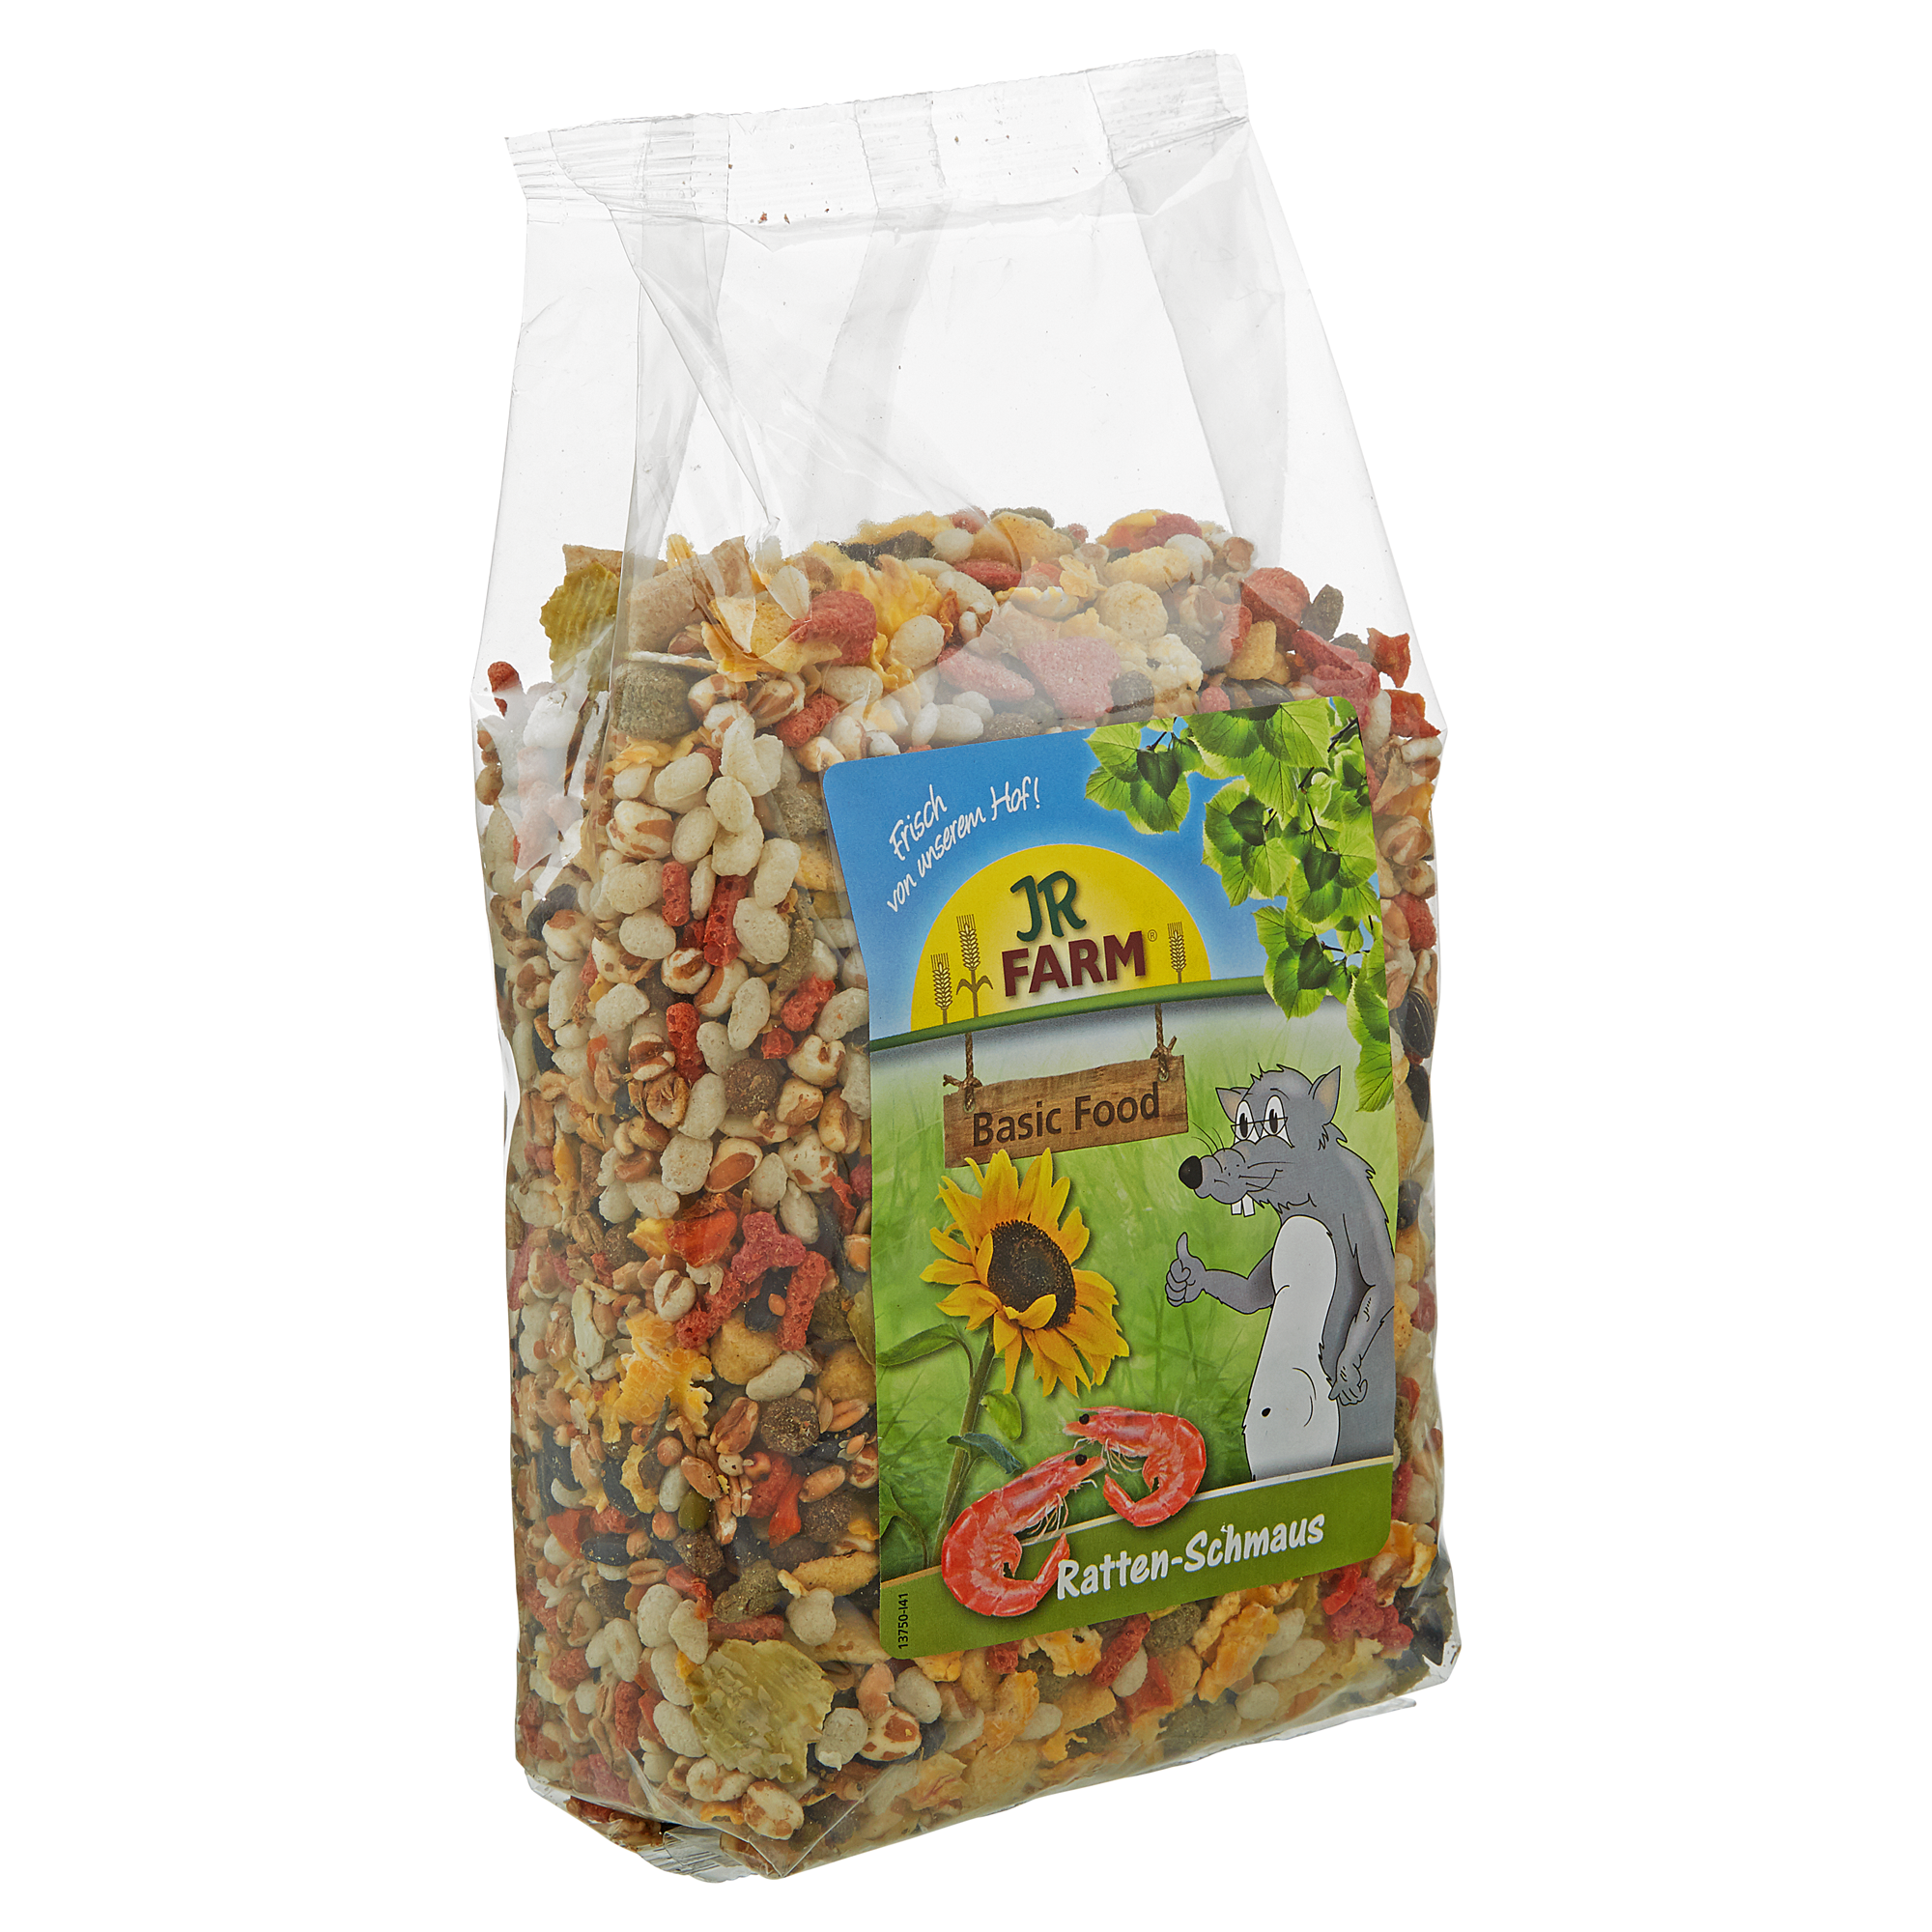 Nagerfutter "Basic Food" Ratten-Schmaus 0,6 kg + product picture